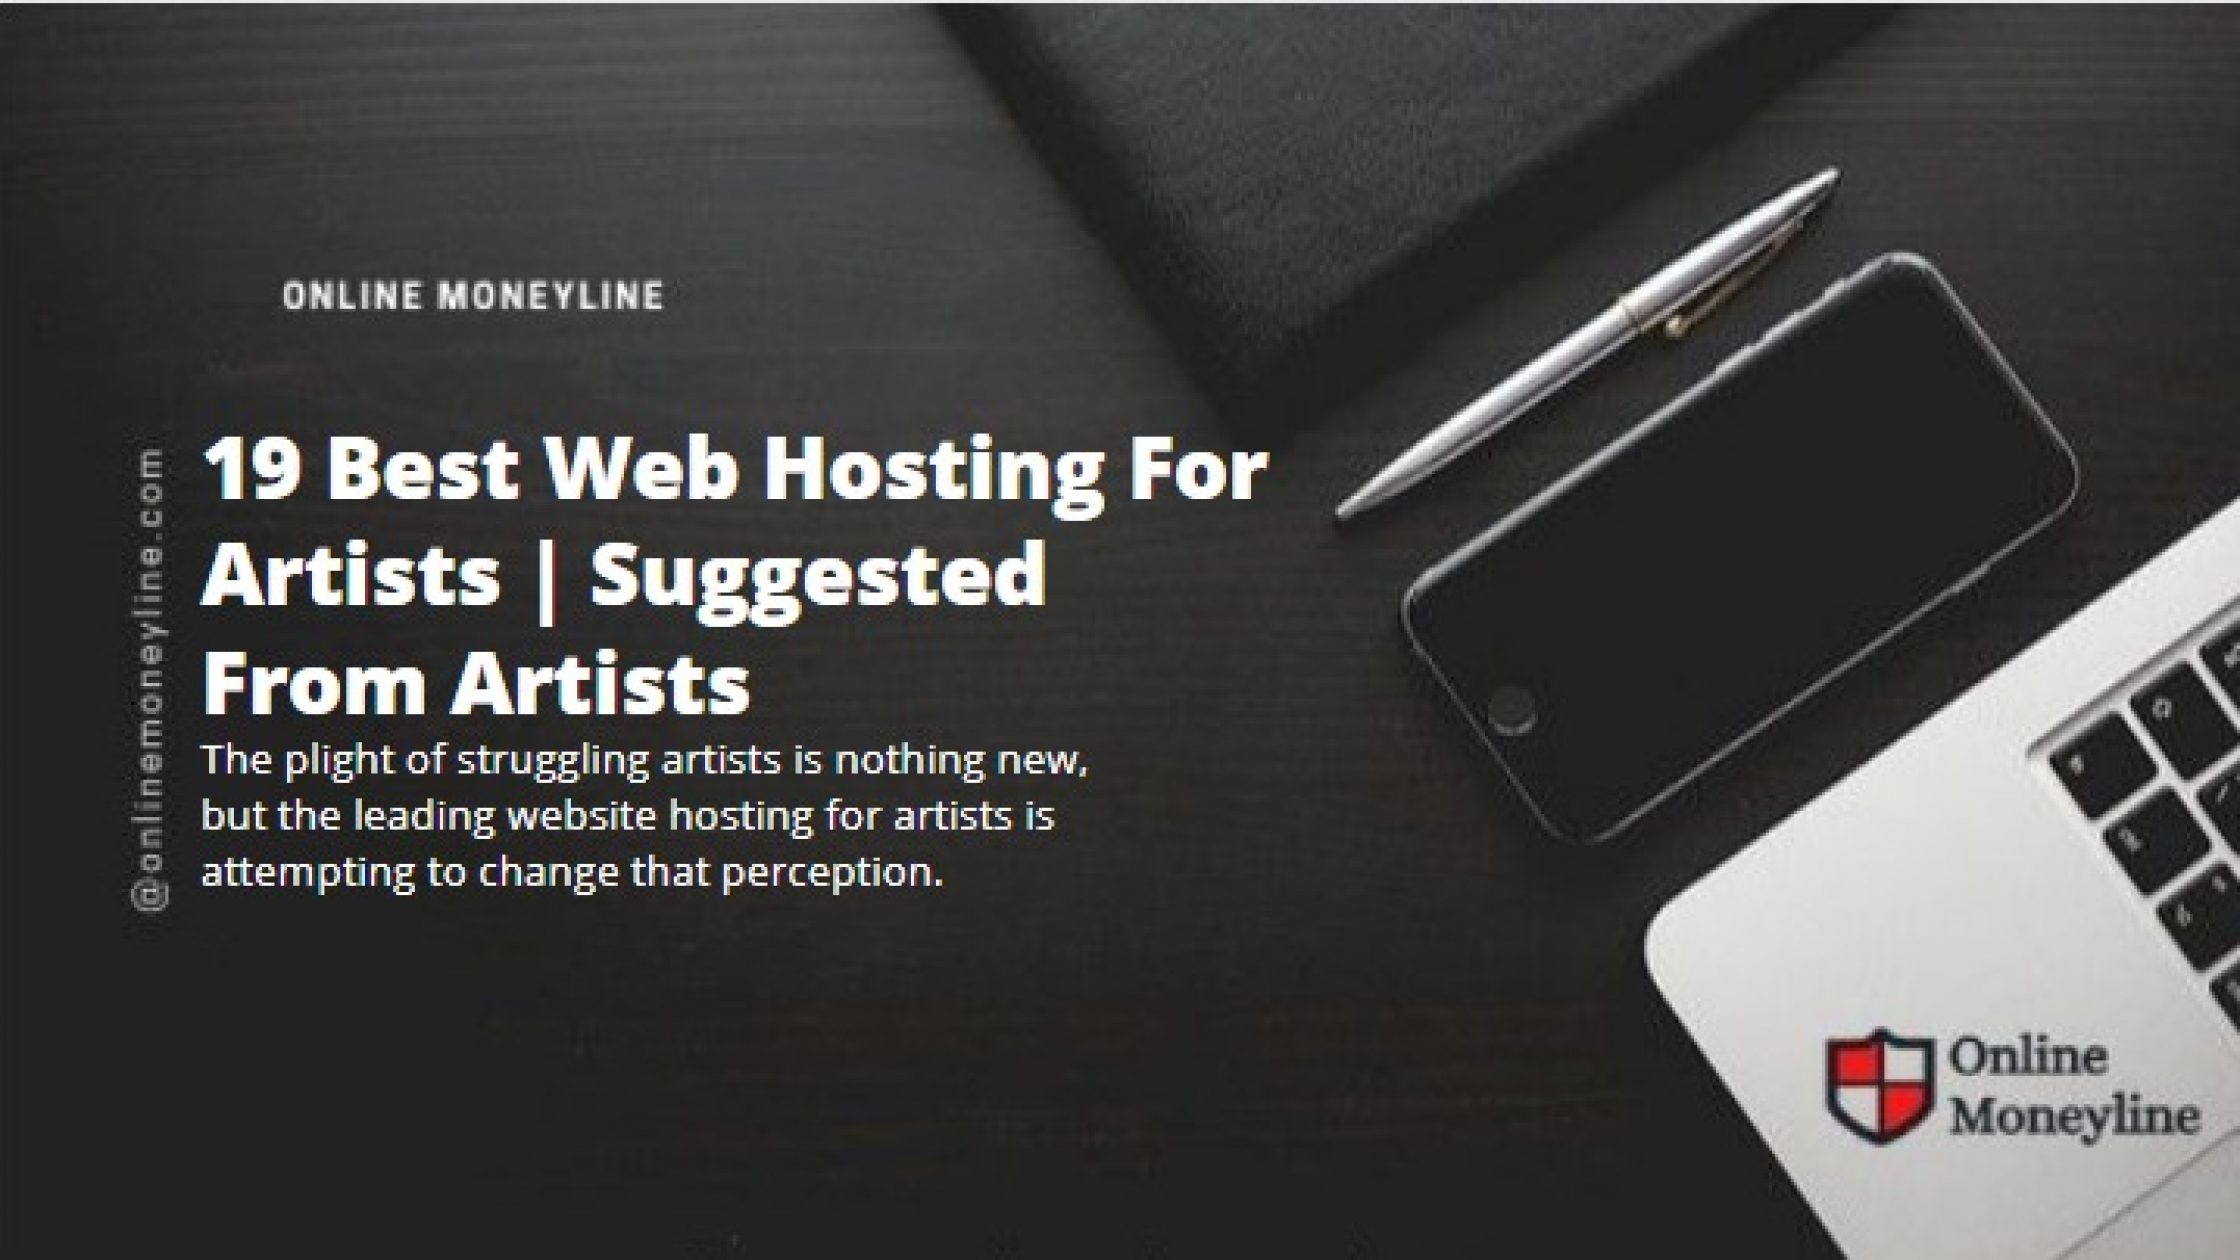 19 Best Web Hosting For Artists | Suggested From Artists